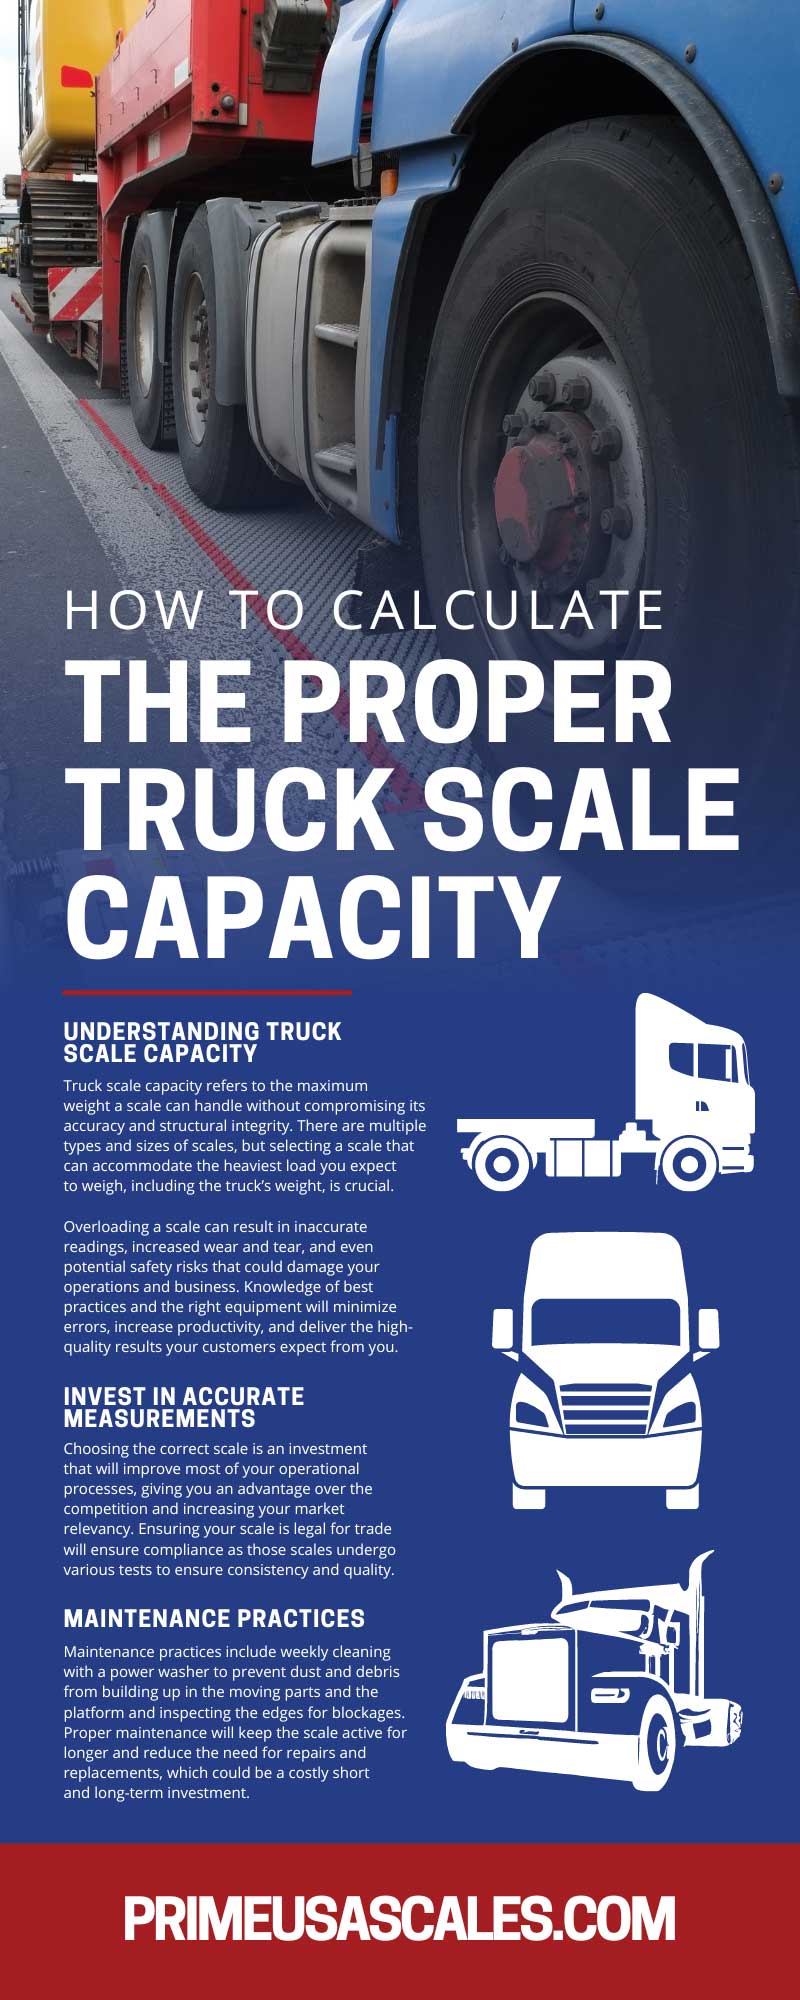 How To Calculate the Proper Truck Scale Capacity